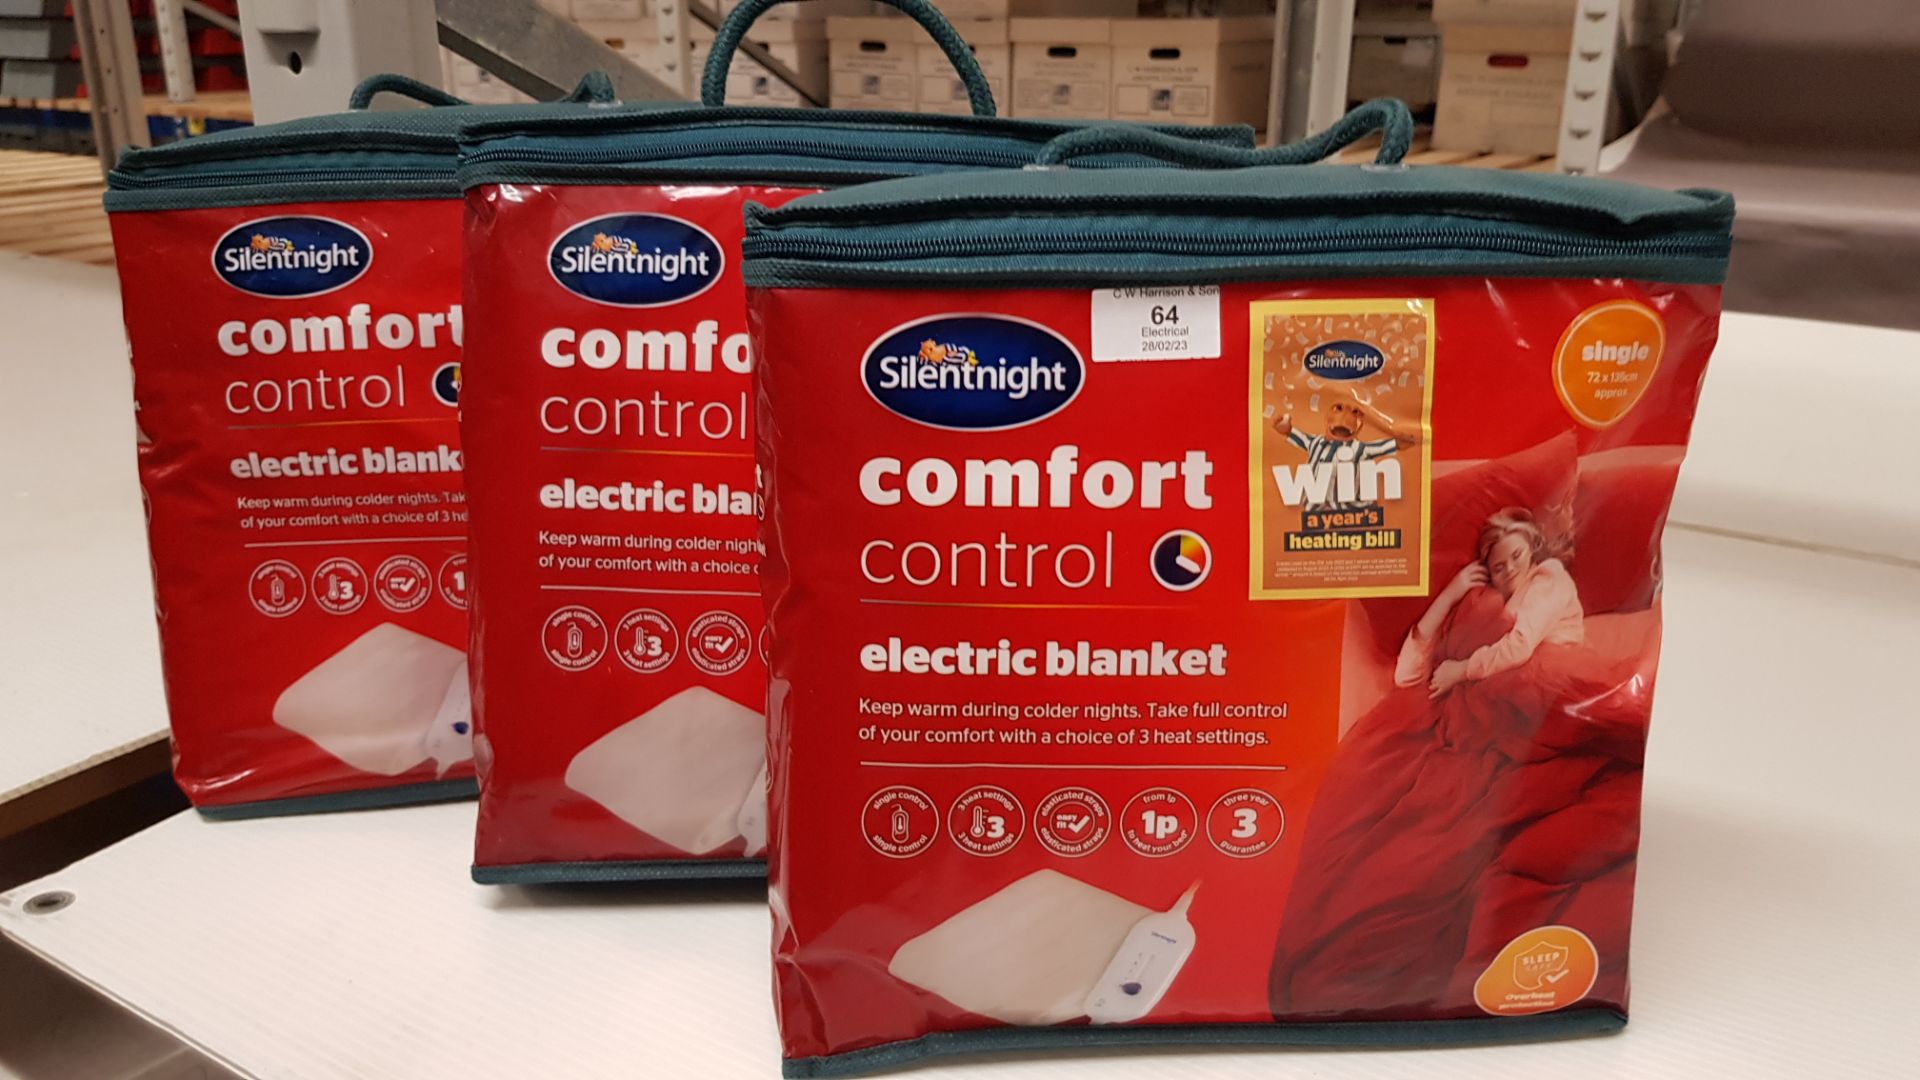 3x Silentnight Comfort Control Electric Blanket Single. RRP £45 Each. - Image 2 of 2